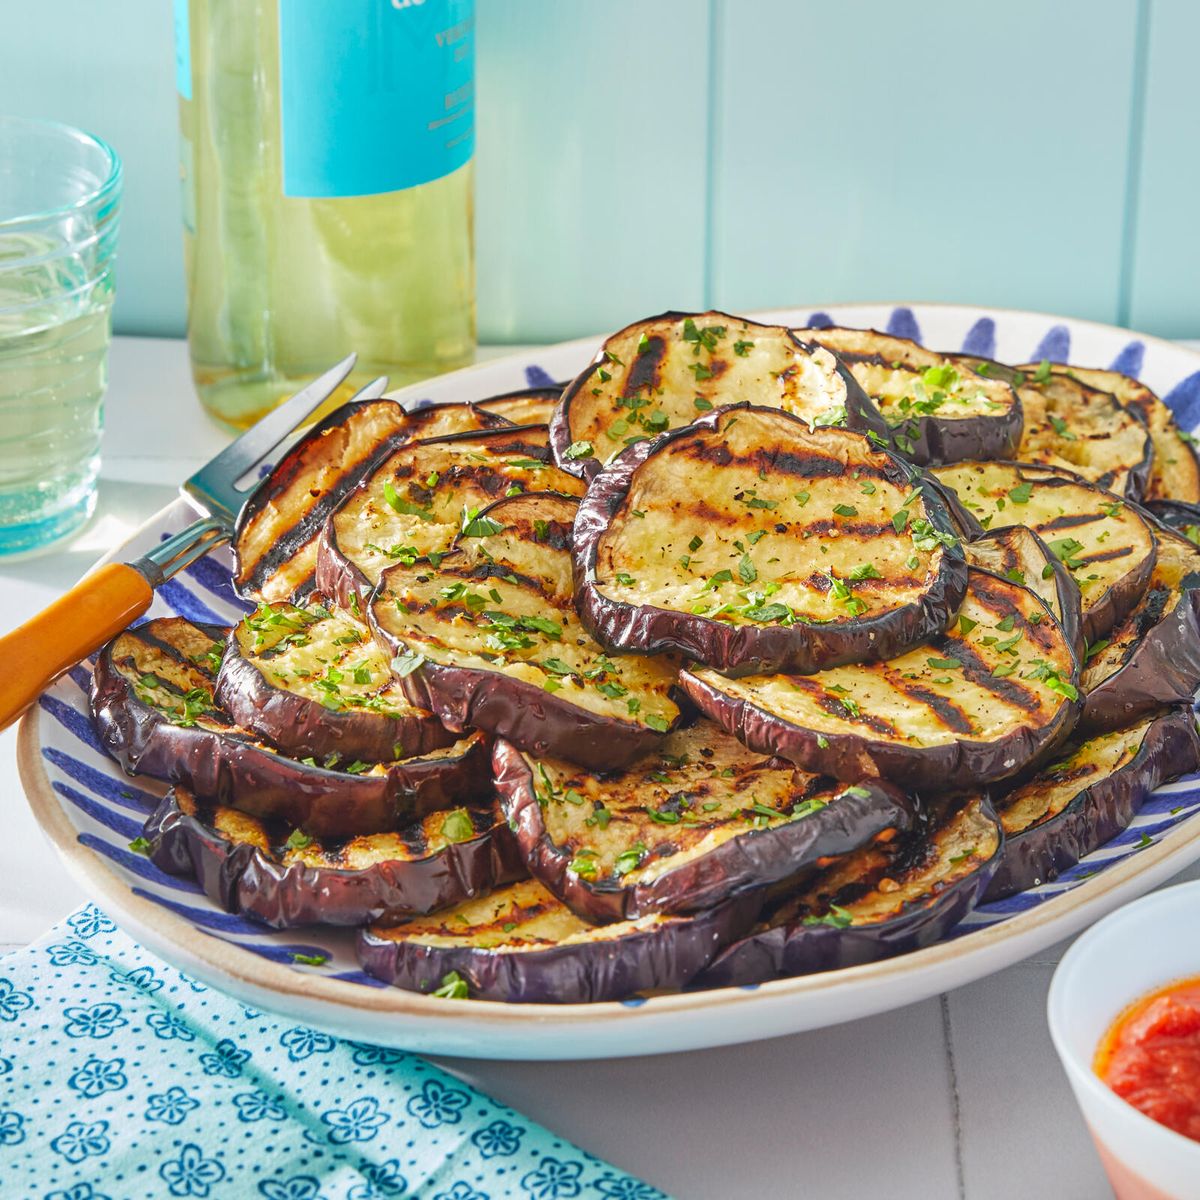 the pioneer woman's grilled eggplant recipe